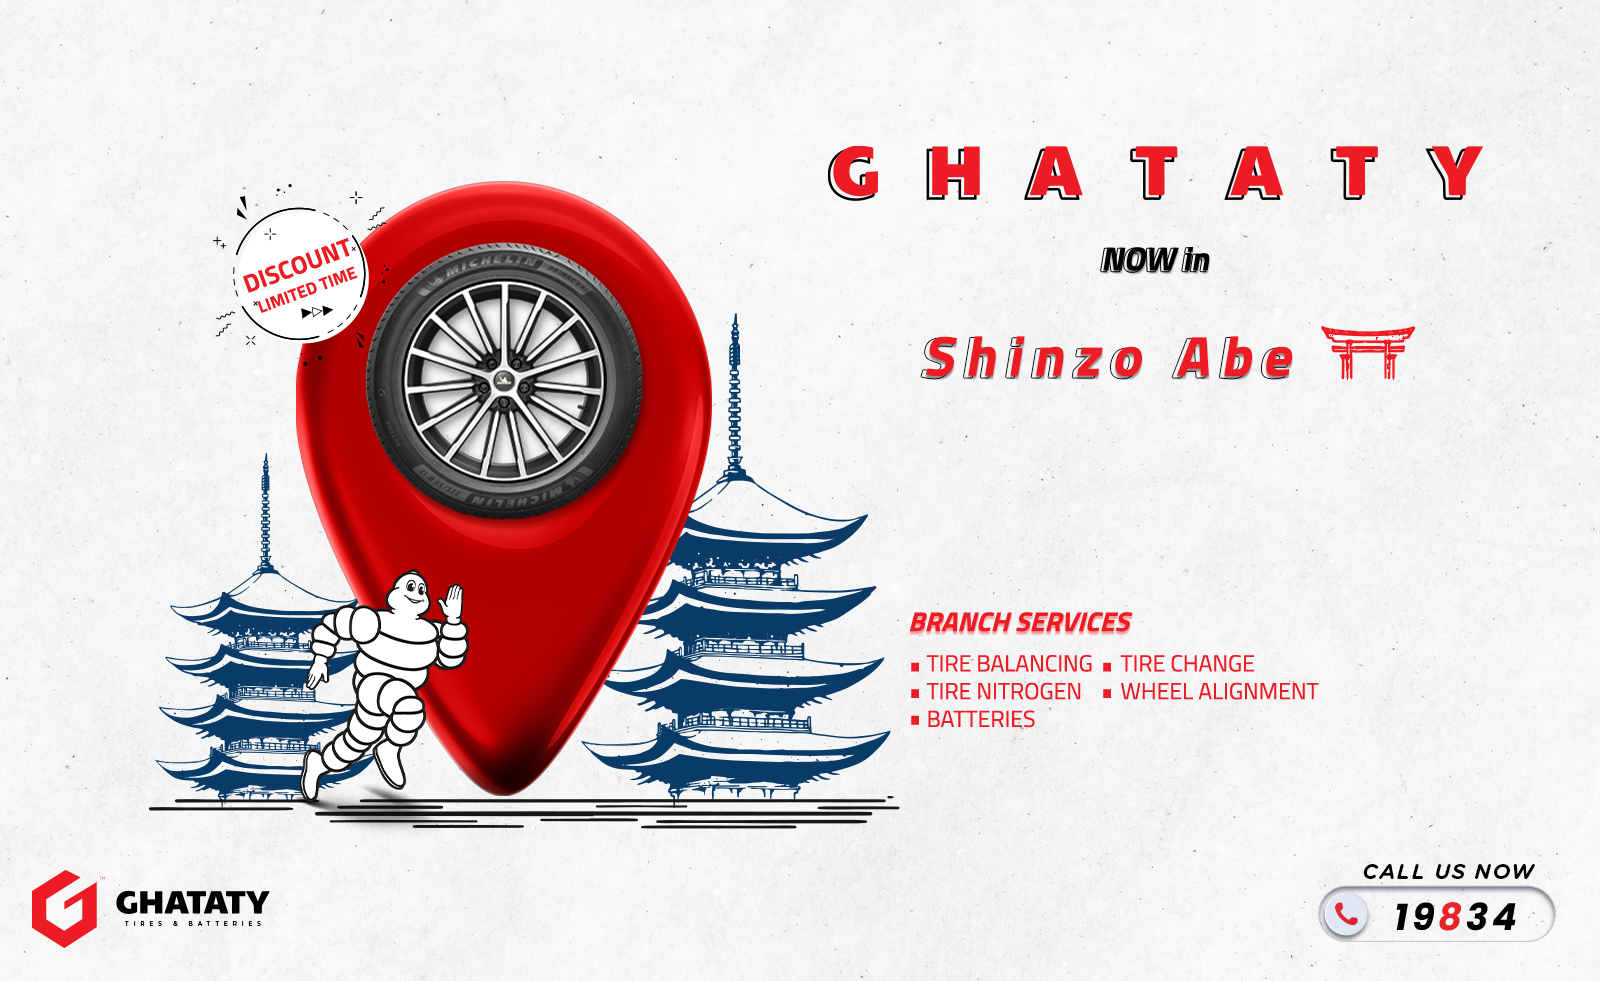 Now Ghataty at Shinzo Abe with a new branch